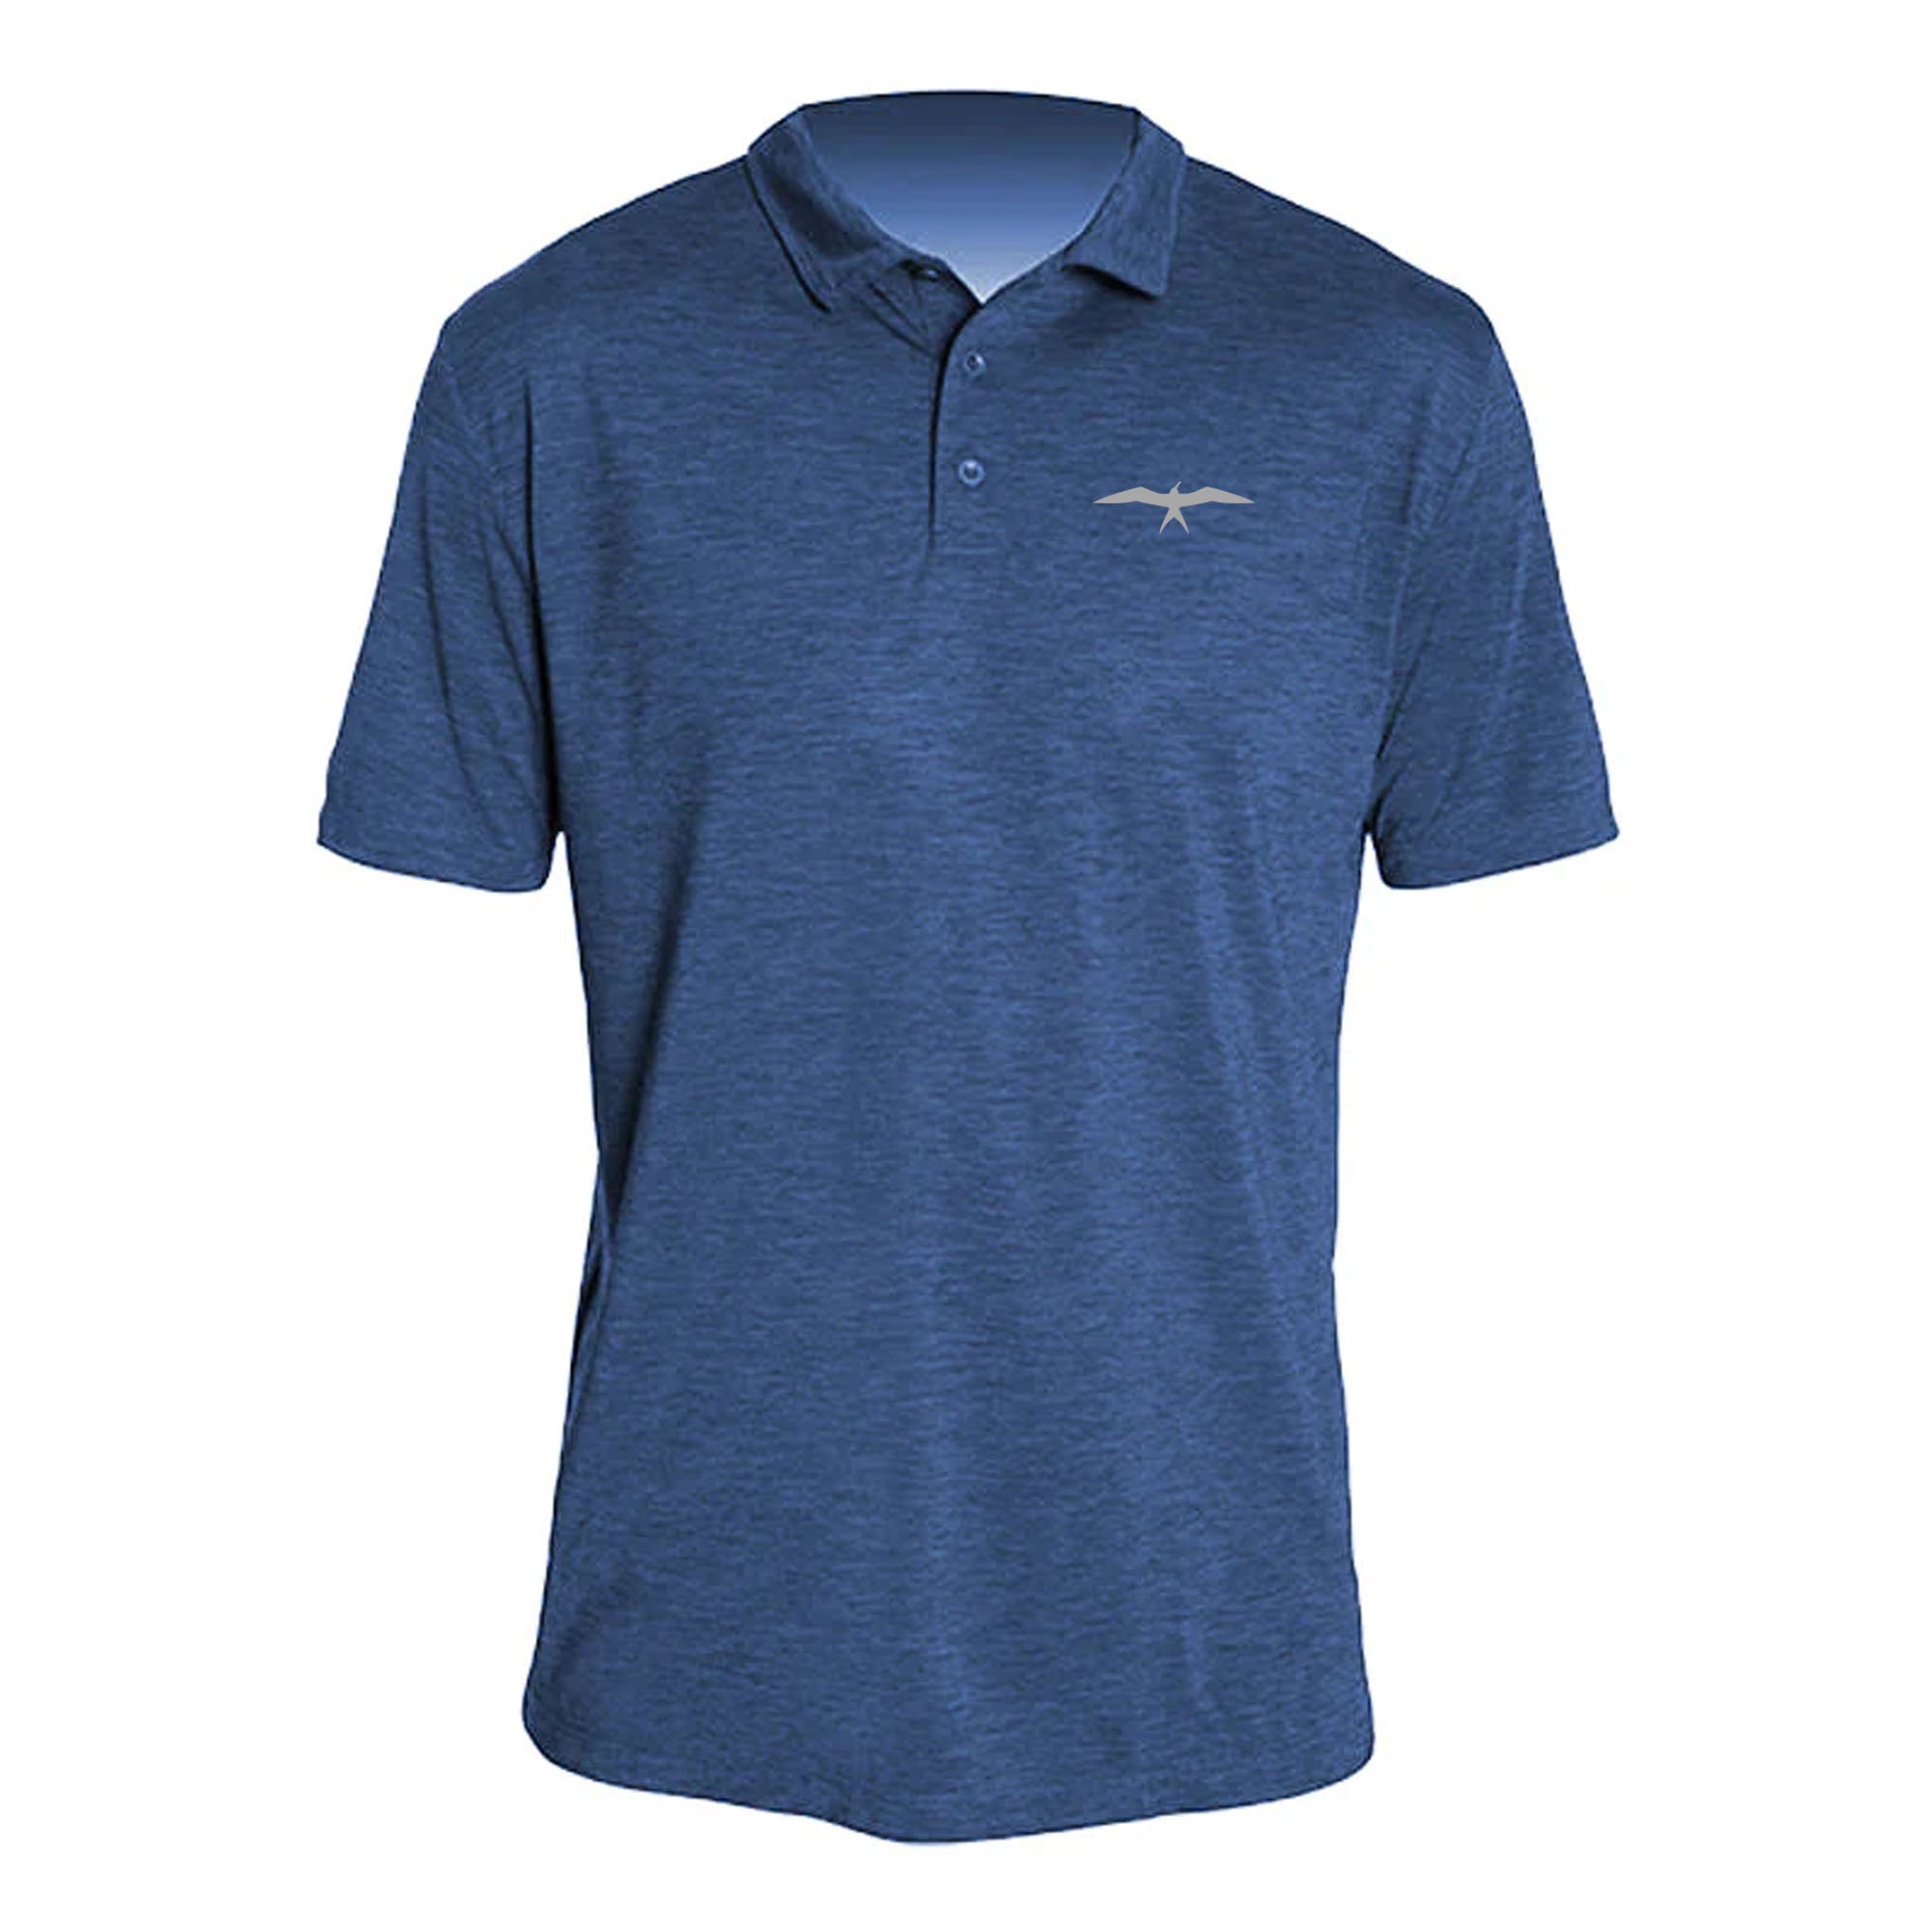 Invincible Anetik Low Pro Tech Polo S/S Navy Heathered